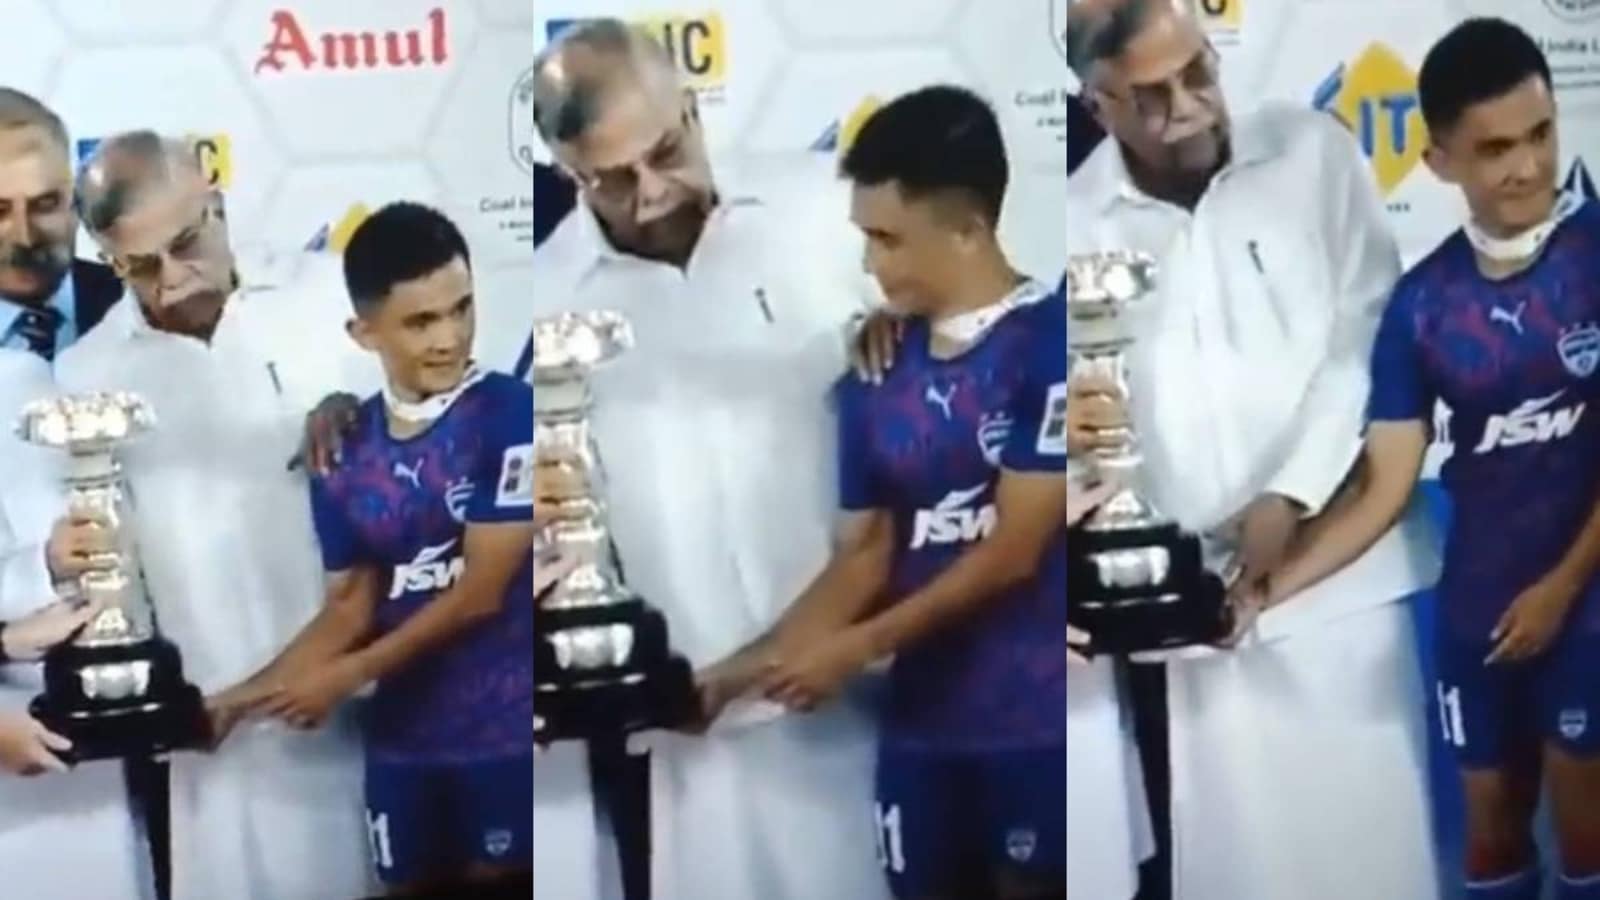 Watch: Minister pushes away Sunil Chhetri for obstructing his view for a photo, gets slammed on Twitter; ‘Shameless…’